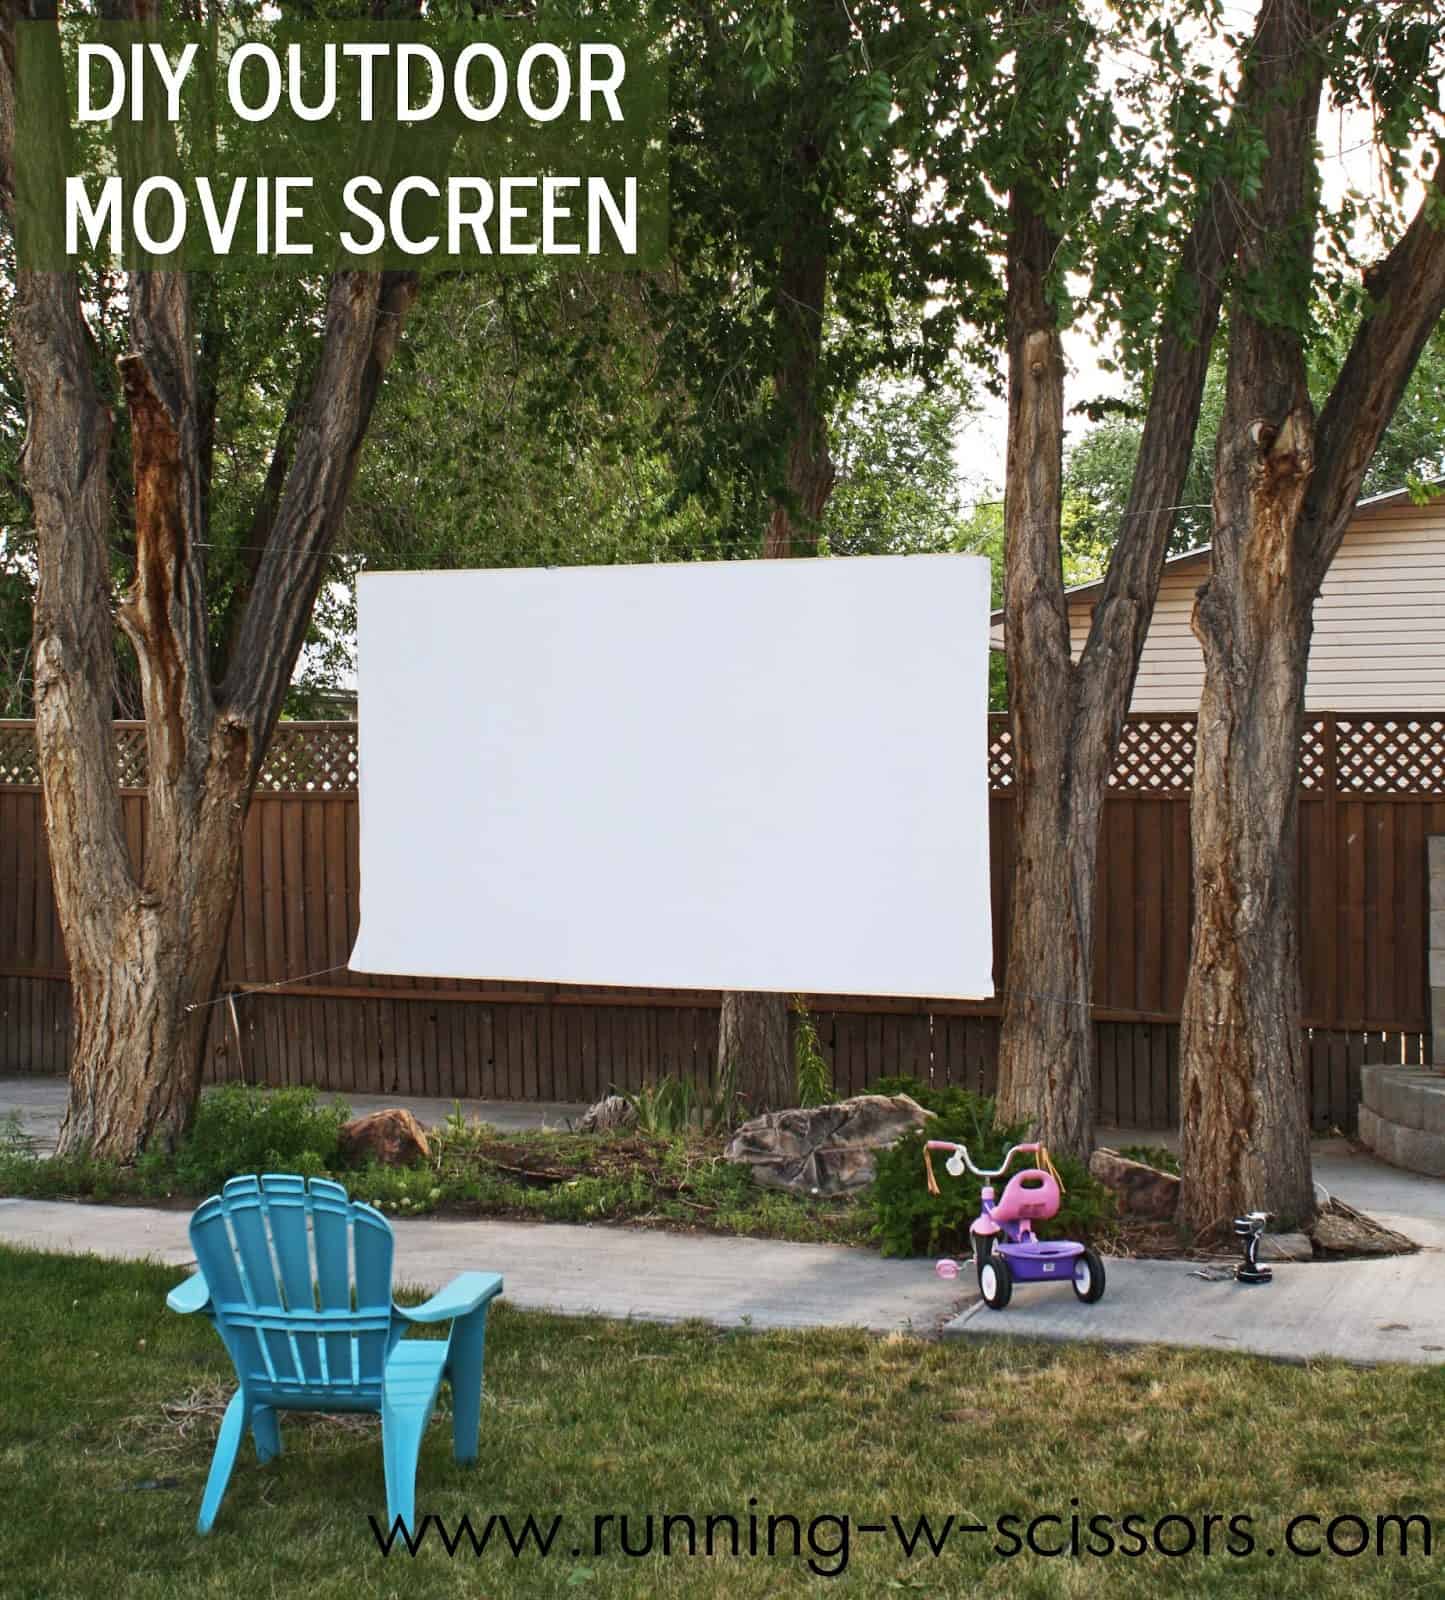 Tree mounted outdoor movie screen